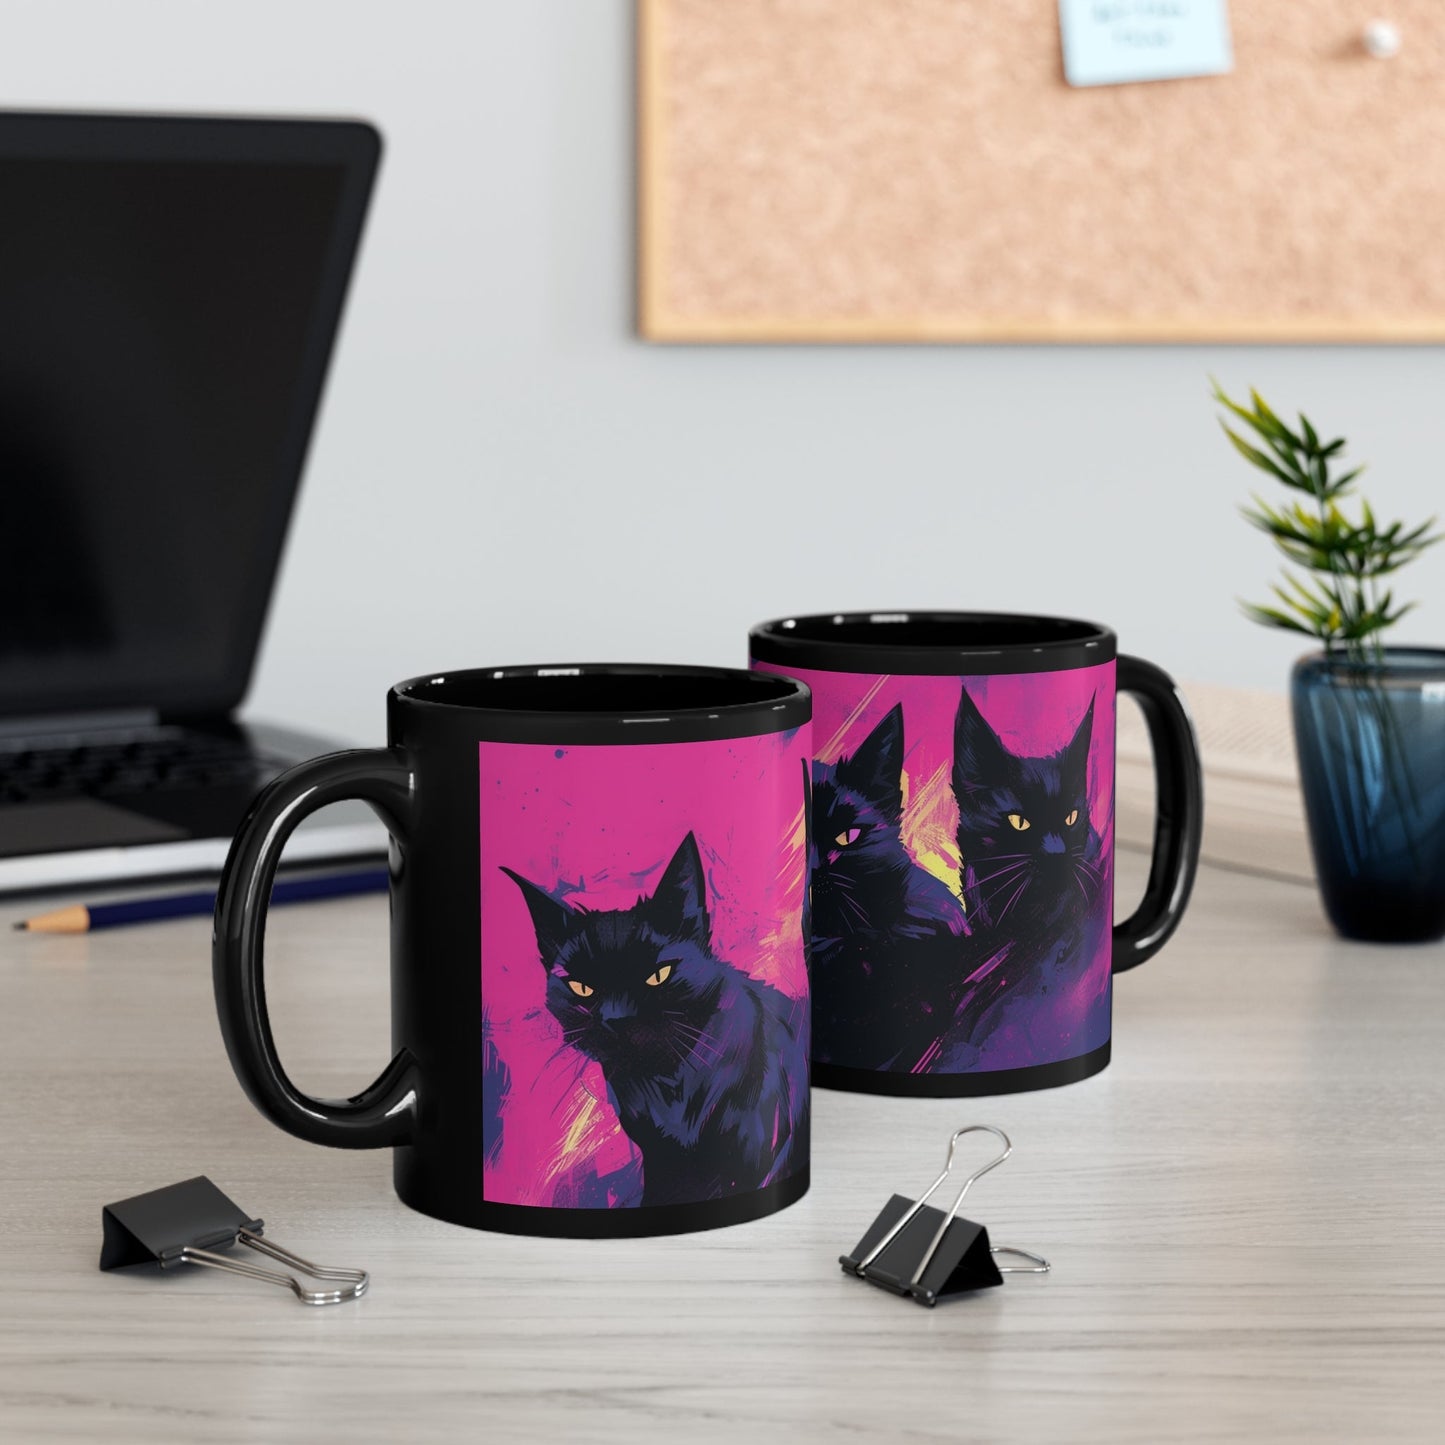 Two coffee mugs on a desk, both with an image of three black cats on a pink background painted in a watercolor style.